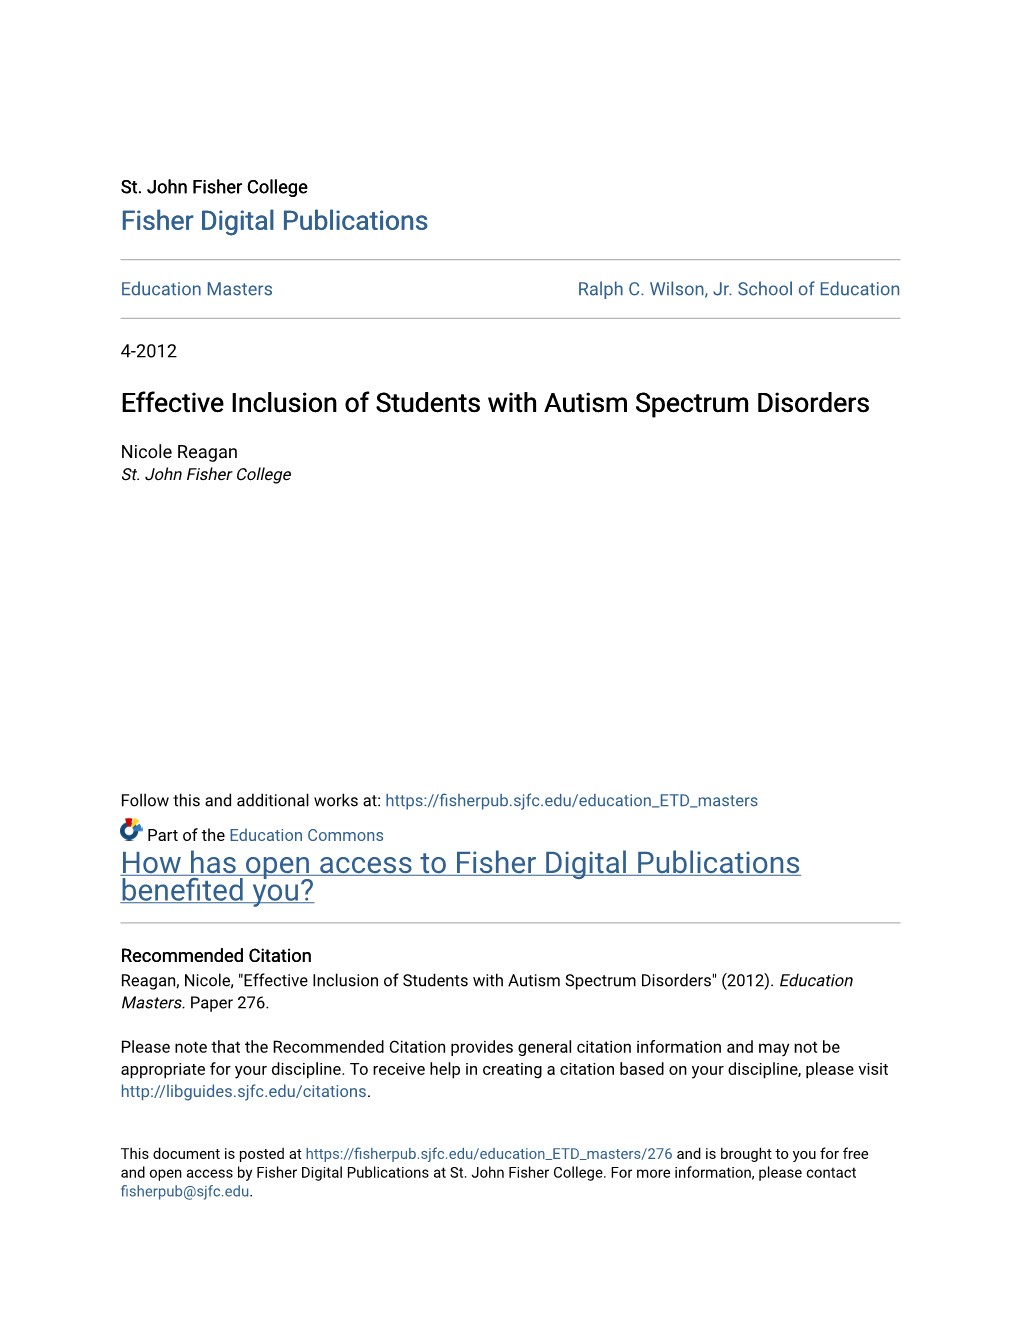 Effective Inclusion of Students with Autism Spectrum Disorders